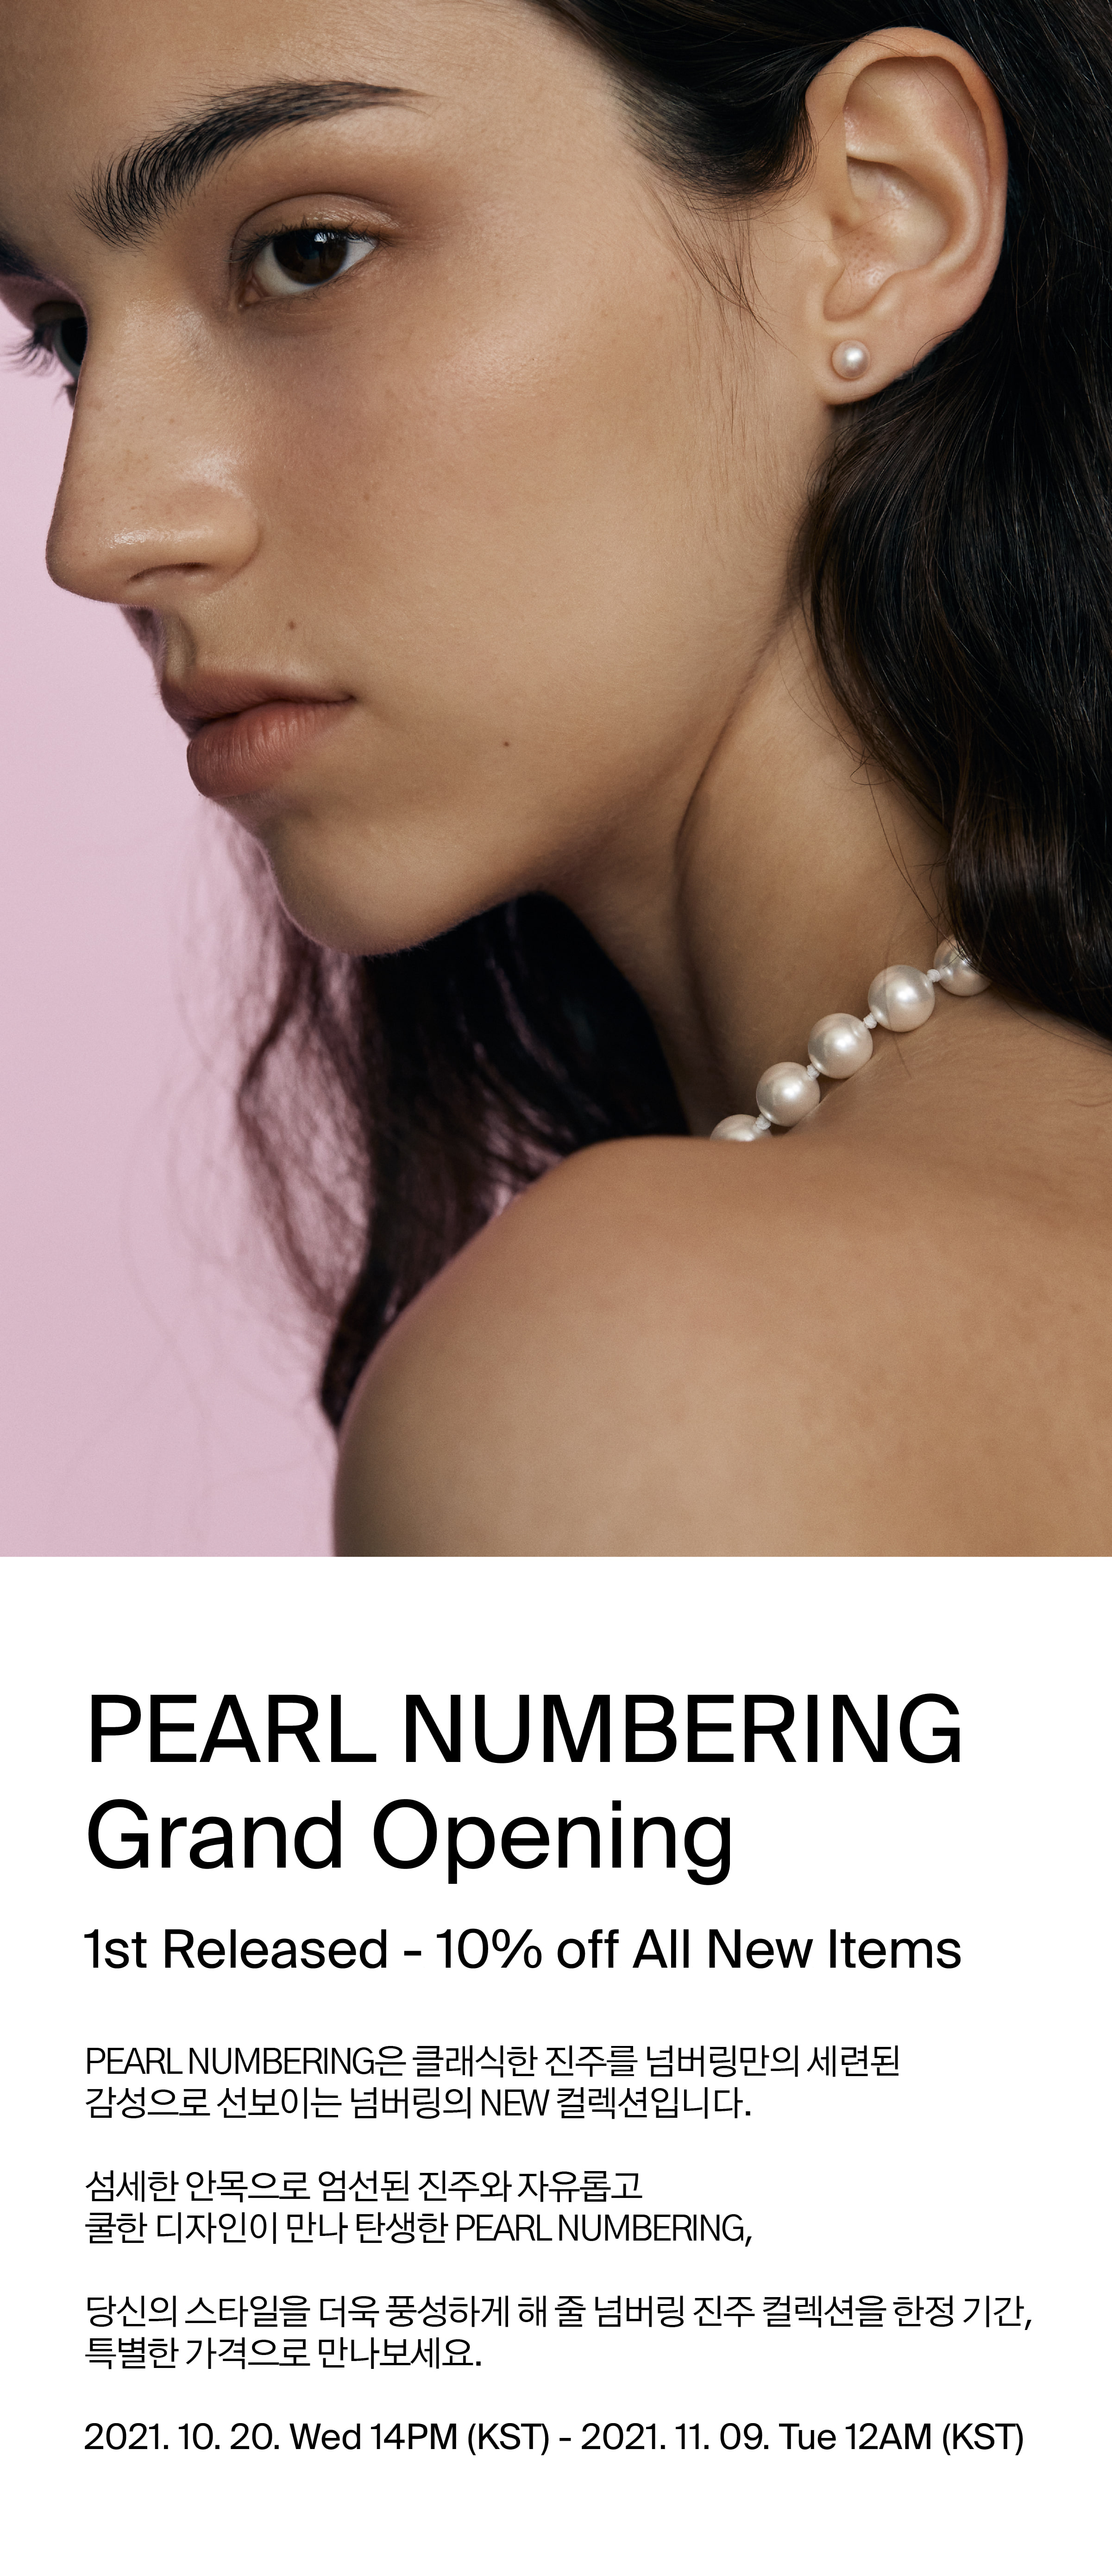 Pearl Numbering Grand Opening